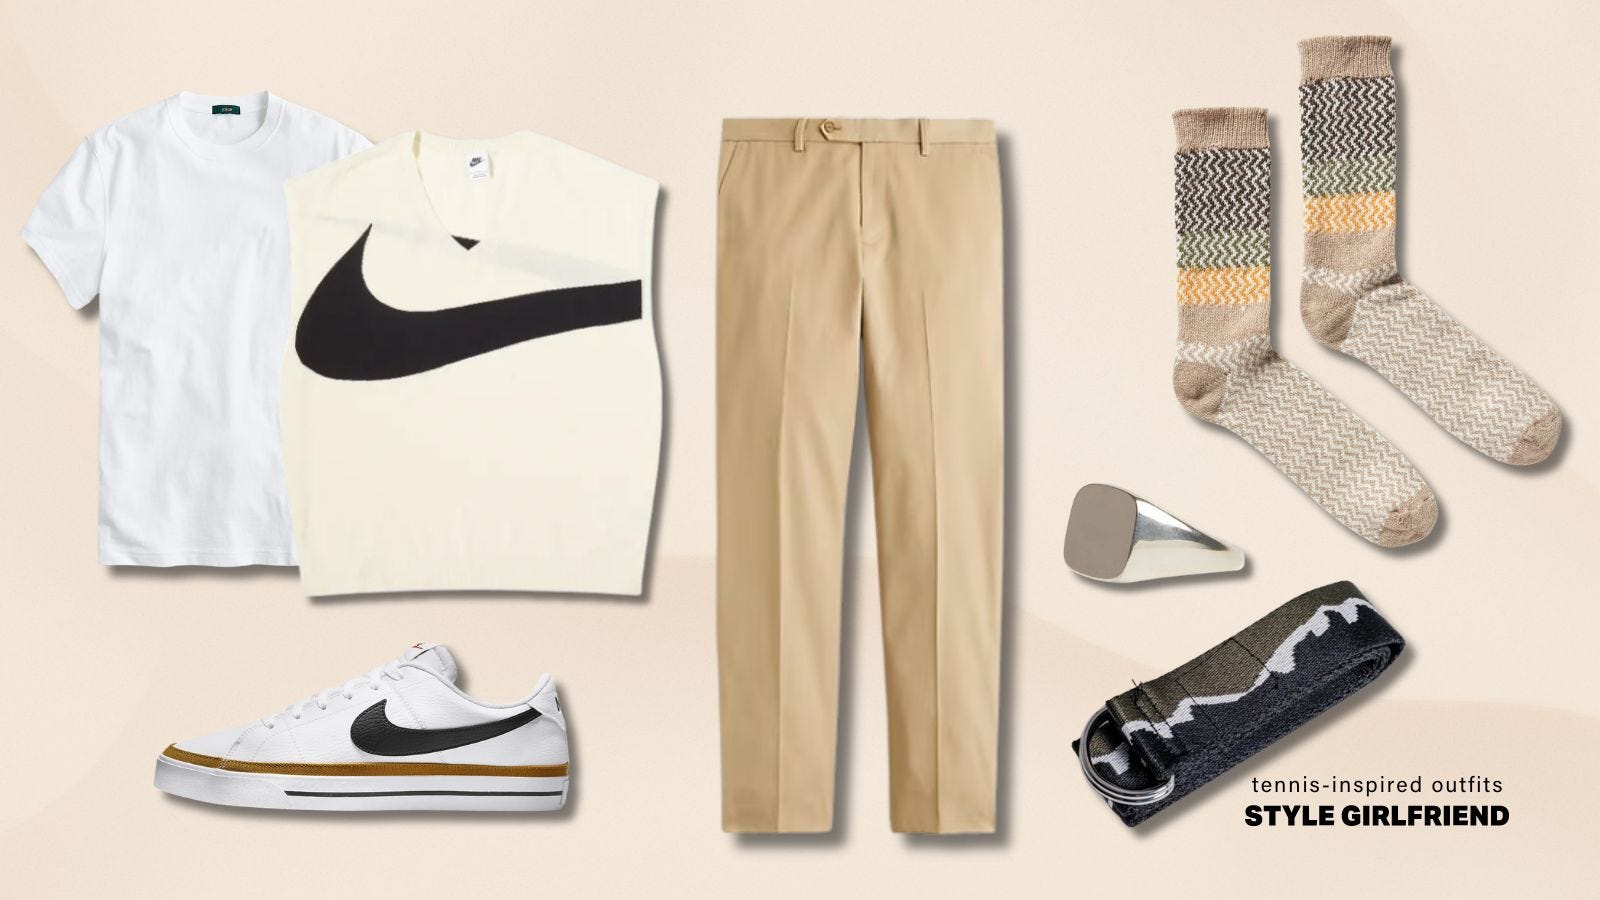 Flat lay image of casual, tennis style men's clothing including cream sweater vest, white t-shirt, tan pants, socks, signet ring and white tennis shoes